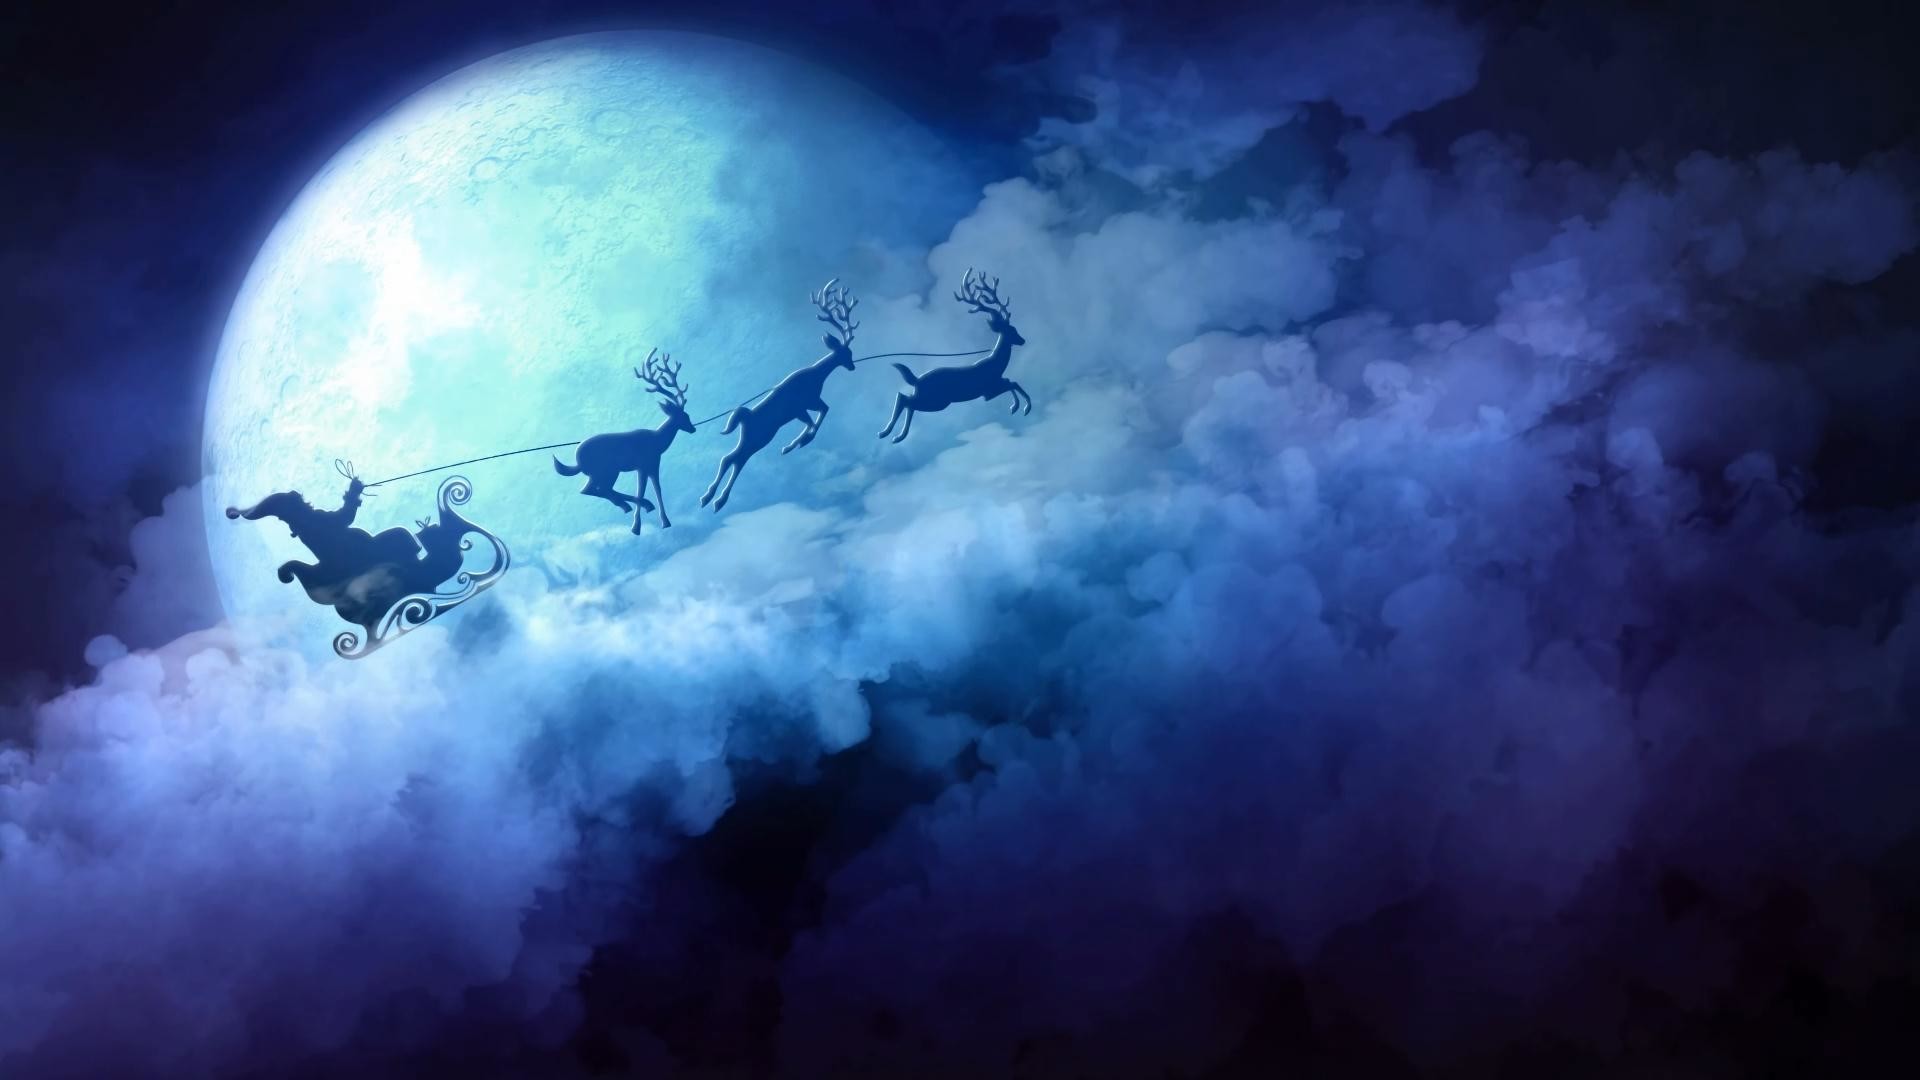 1920x1080 Wallpaper S Collection Christmas Wallpapers